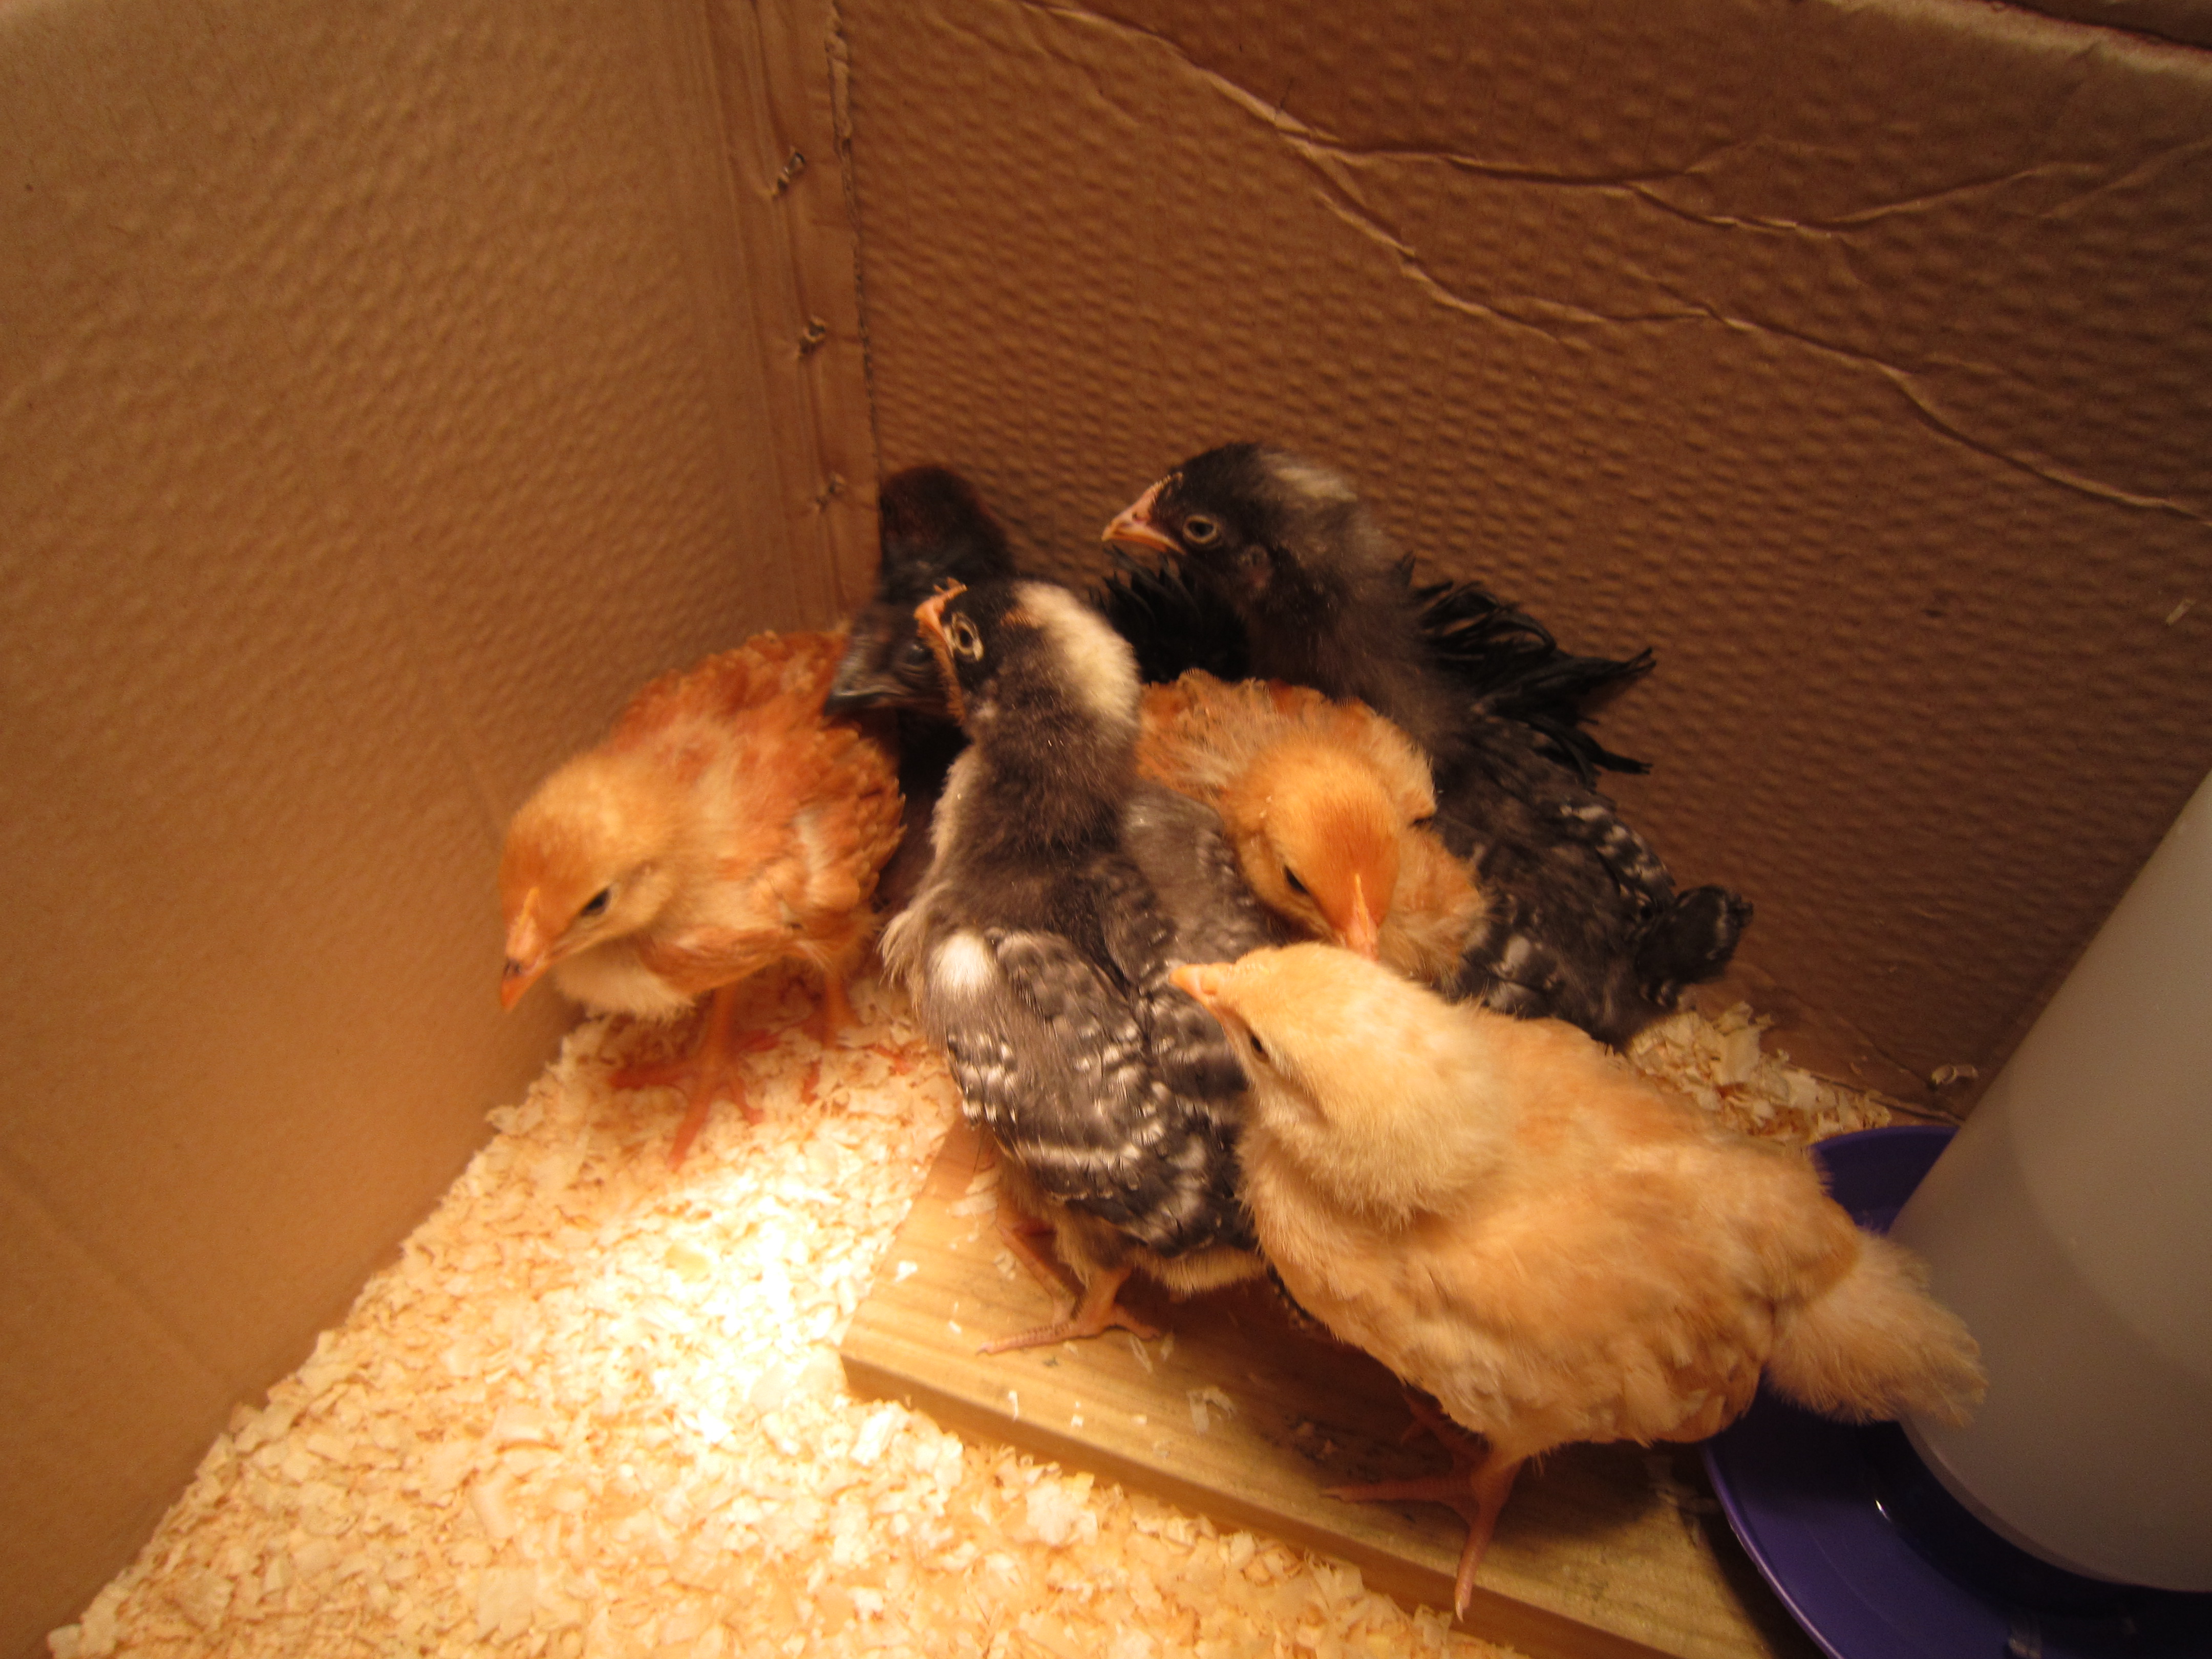 We brought home 3 week old chicks to a cardboard box.  I soon realized that  the box would get soaked from these very messy chickens.  Next step, build a brooder.